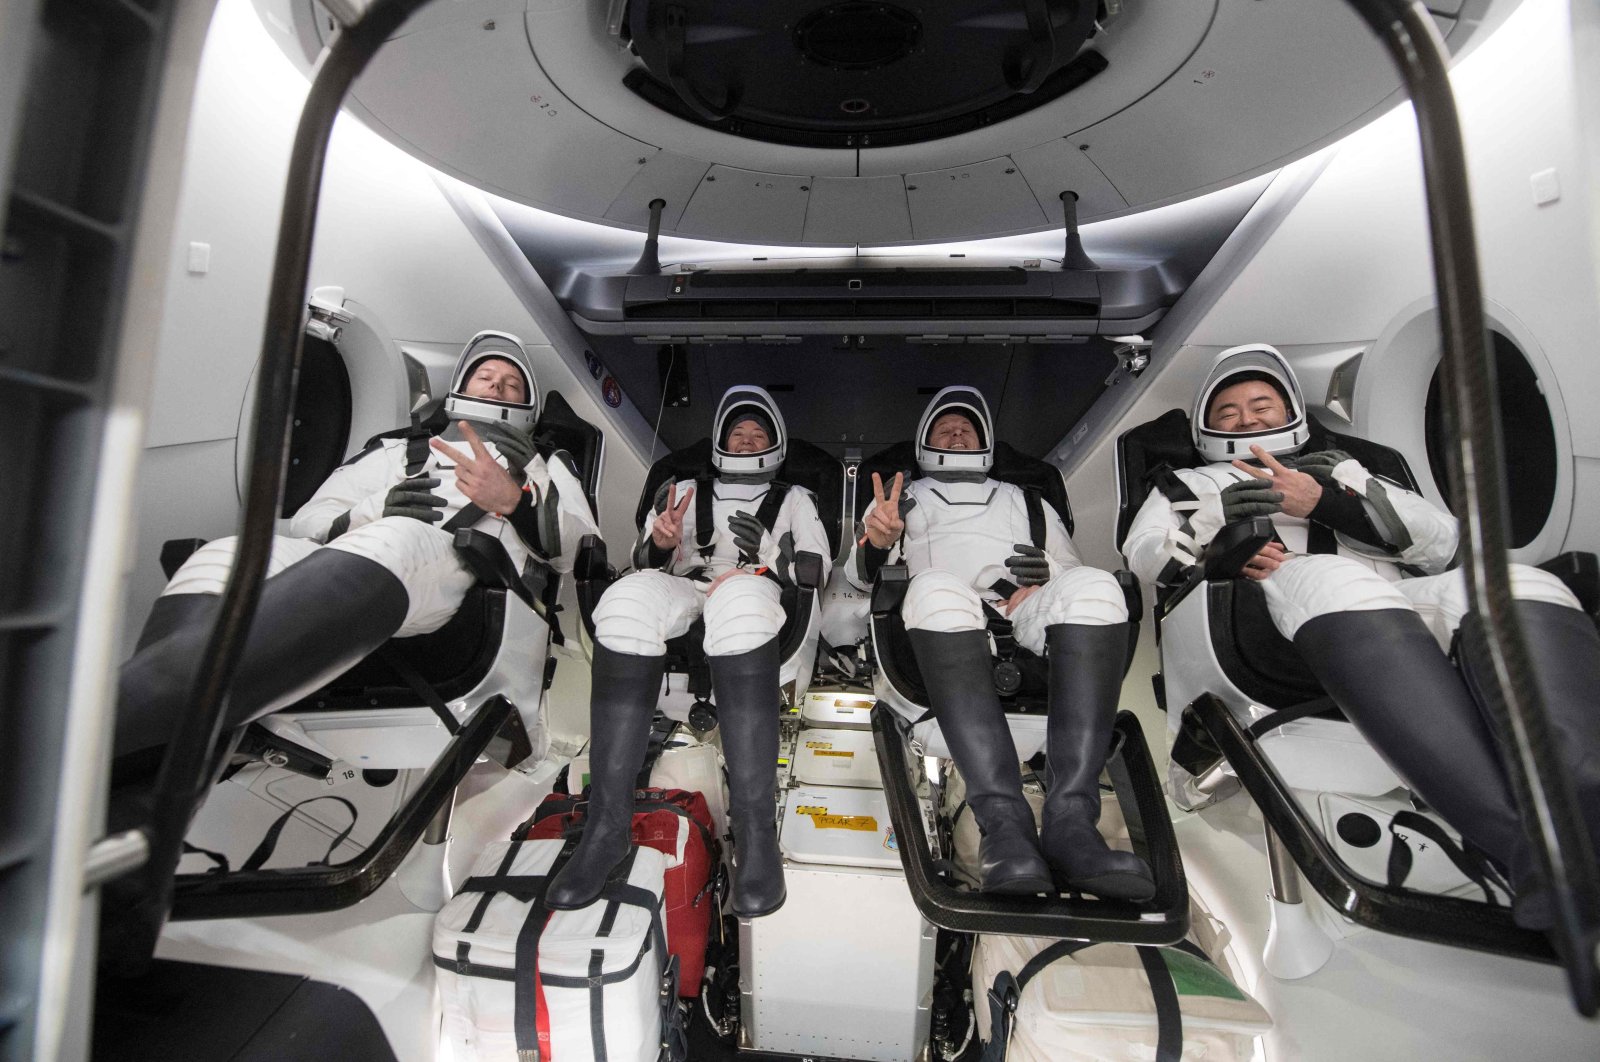 This NASA handout photo shows (from L) ESA (European Space Agency) astronaut Thomas Pesquet, NASA astronauts Megan McArthur and Shane Kimbrough, and Japan Aerospace Exploration Agency (JAXA) astronaut Aki Hoshide, inside the SpaceX Crew Dragon Endeavour spacecraft onboard the SpaceX GO Navigator recovery ship shortly after having landed in the Gulf of Mexico off the coast of Pensacola, United States, Nov. 8, 2021. (Photo by Aubrey GEMIGNANI / NASA via AFP)